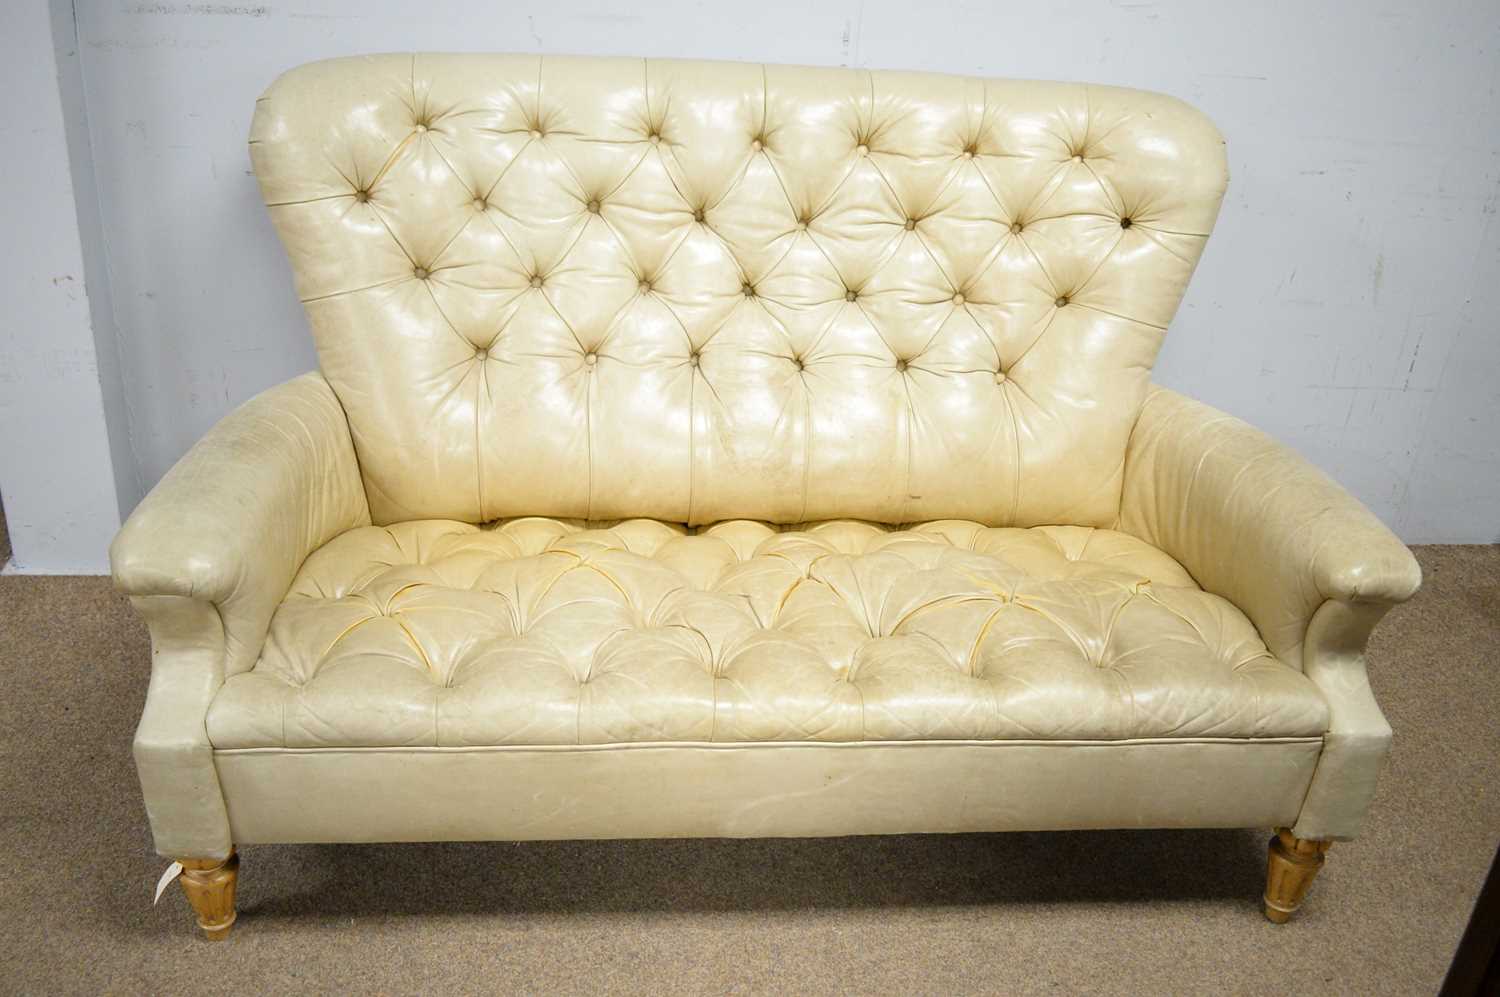 Vanguard Furniture: Chesterfield-style leather upholstered sofa.